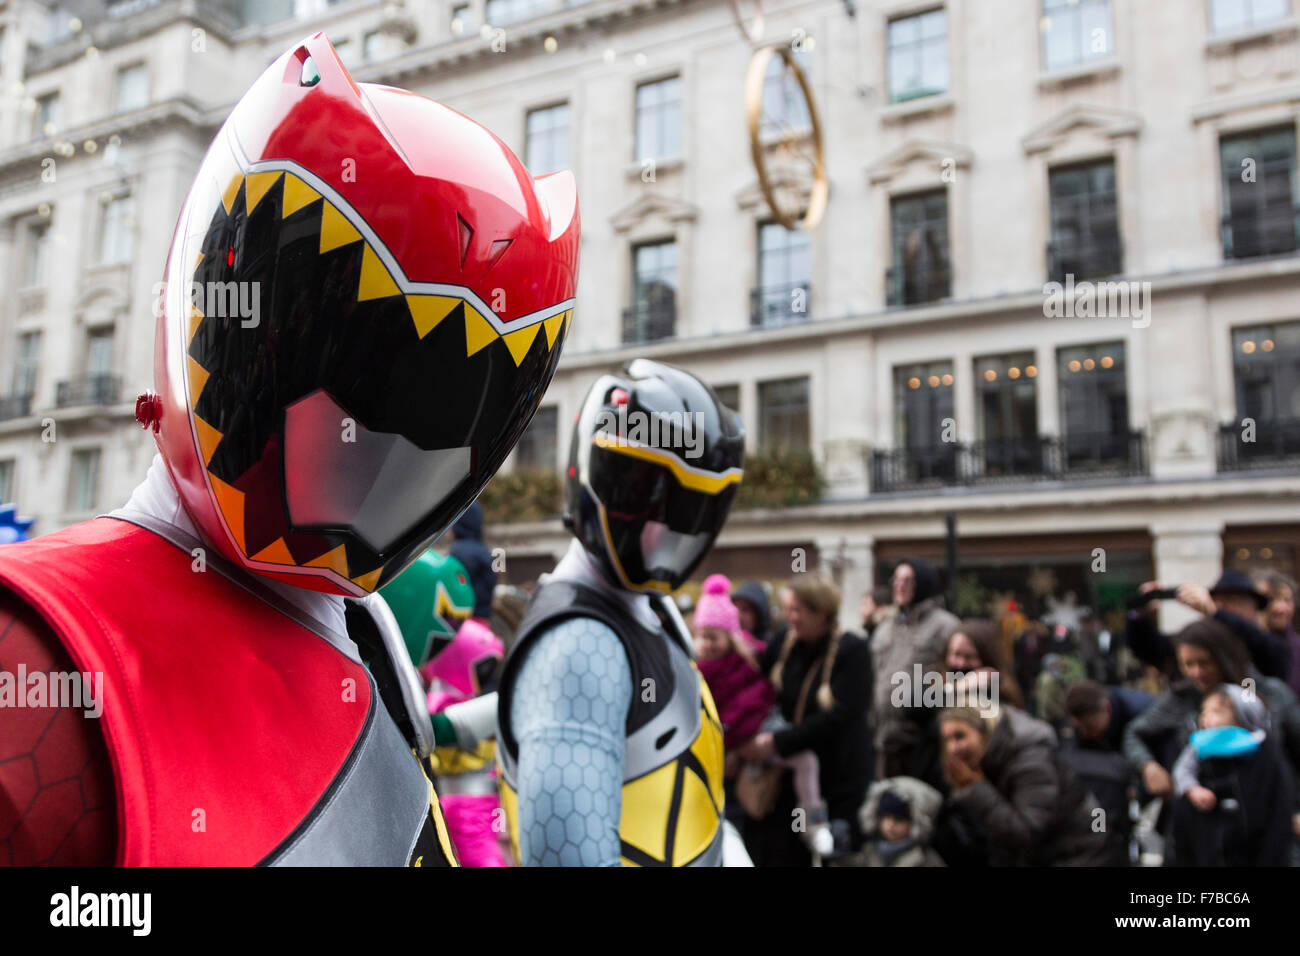 London, UK. 28 November 2015. Power Rangers on parade. The inaugural Hamleys Christmas Toy Parade takes place along Regent Street, which went traffic-free for the day. The parade organised by the world-famous toy store Hamleys featured over 50 of the nation's favourite children's characters along with 400 entertainers, a marching band and giant balloons. The parade is modelled on Macy's annual Thanksgiving Parade in New York. Credit:  Vibrant Pictures/Alamy Live News Stock Photo